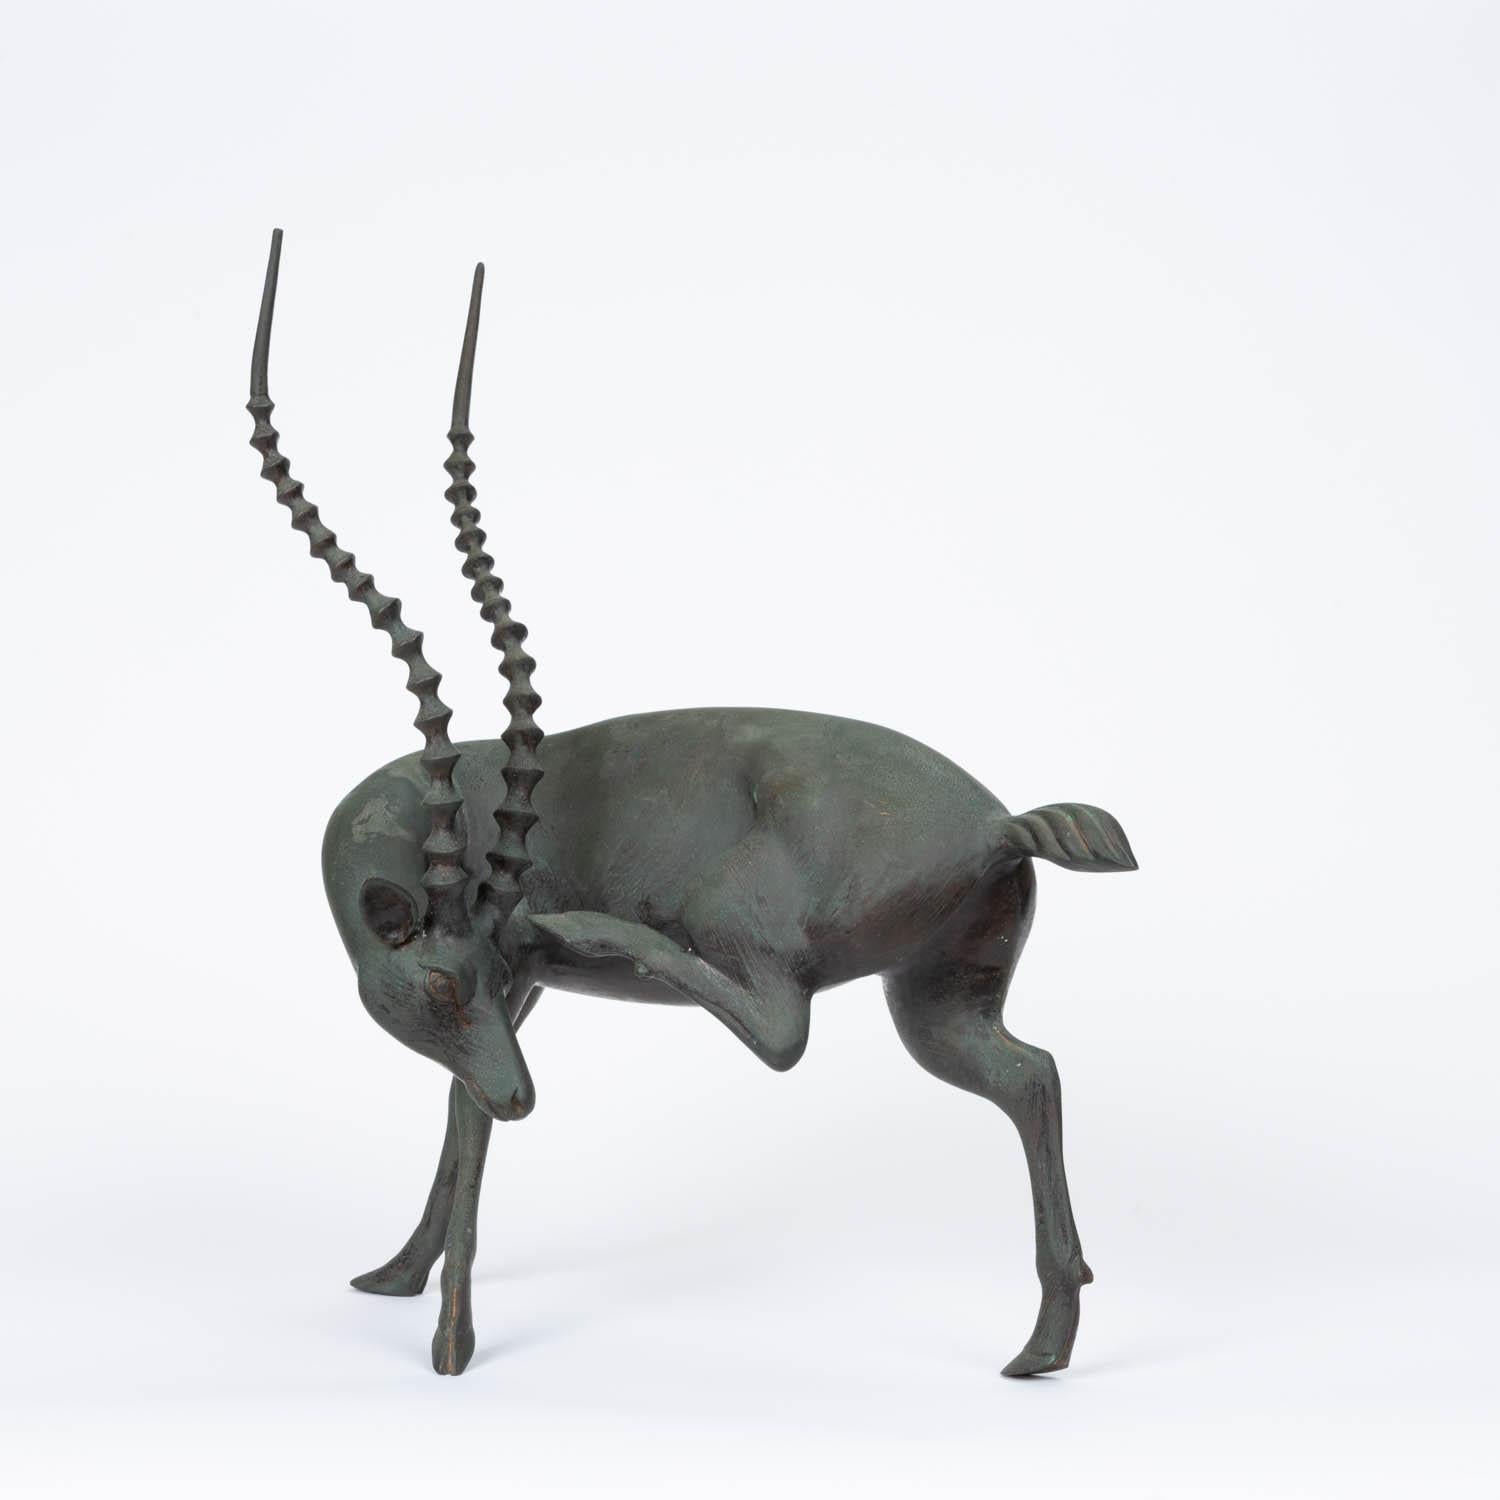 Cast bronze sculpture of a gazelle.

Condition: Excellent vintage condition with age appropriate patina. 

Dimensions: 18” width x 9.5” depth x 22.5” height.